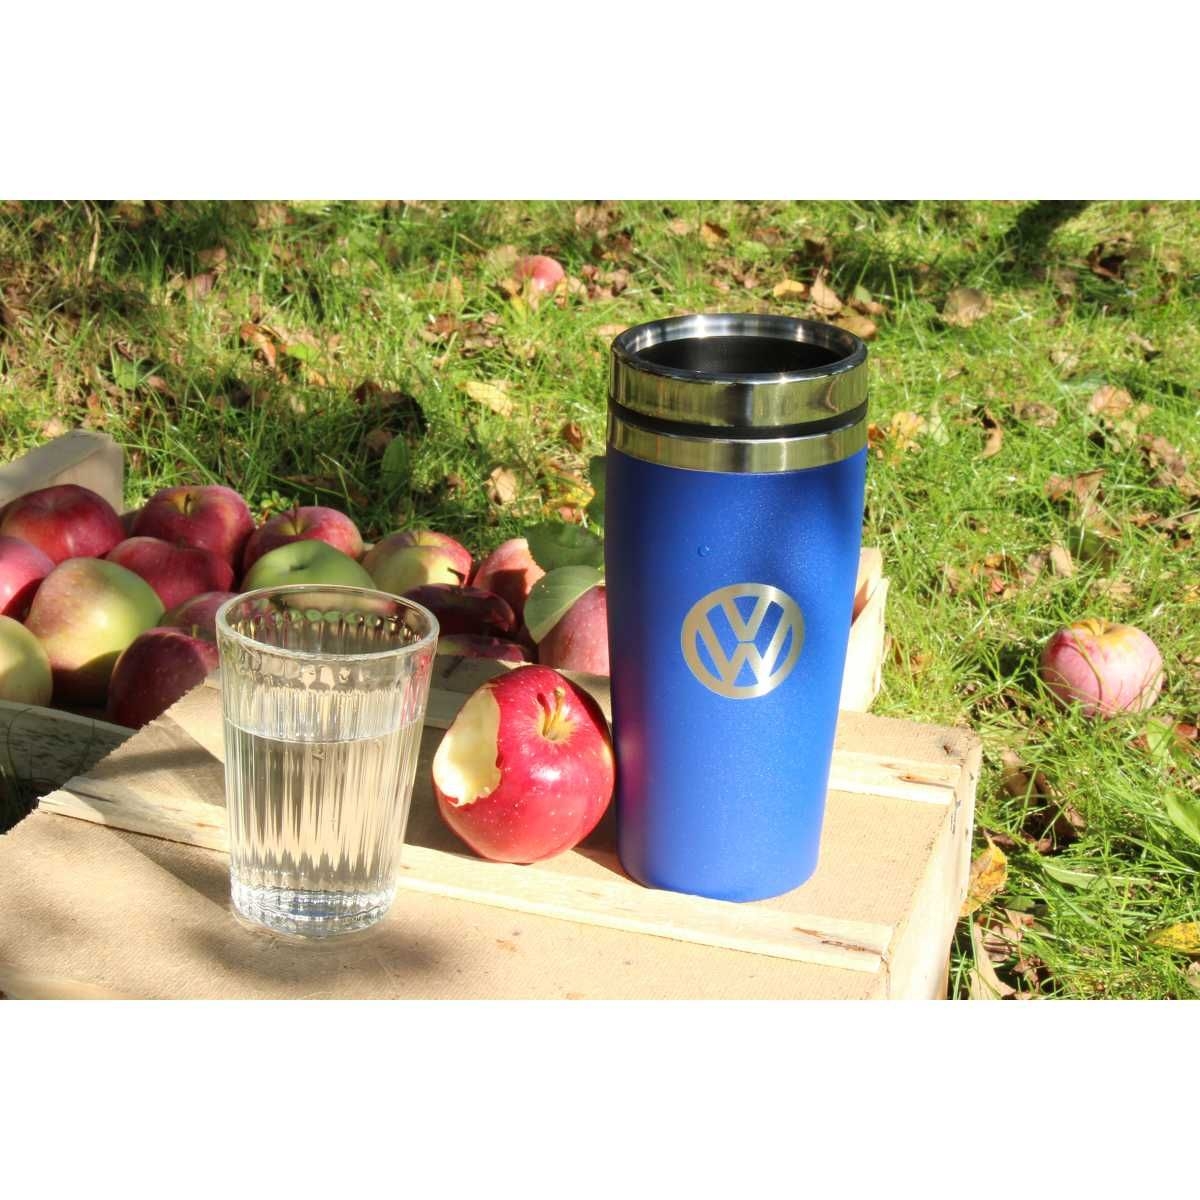 VW Collection Thermobecher blau - BUTB02